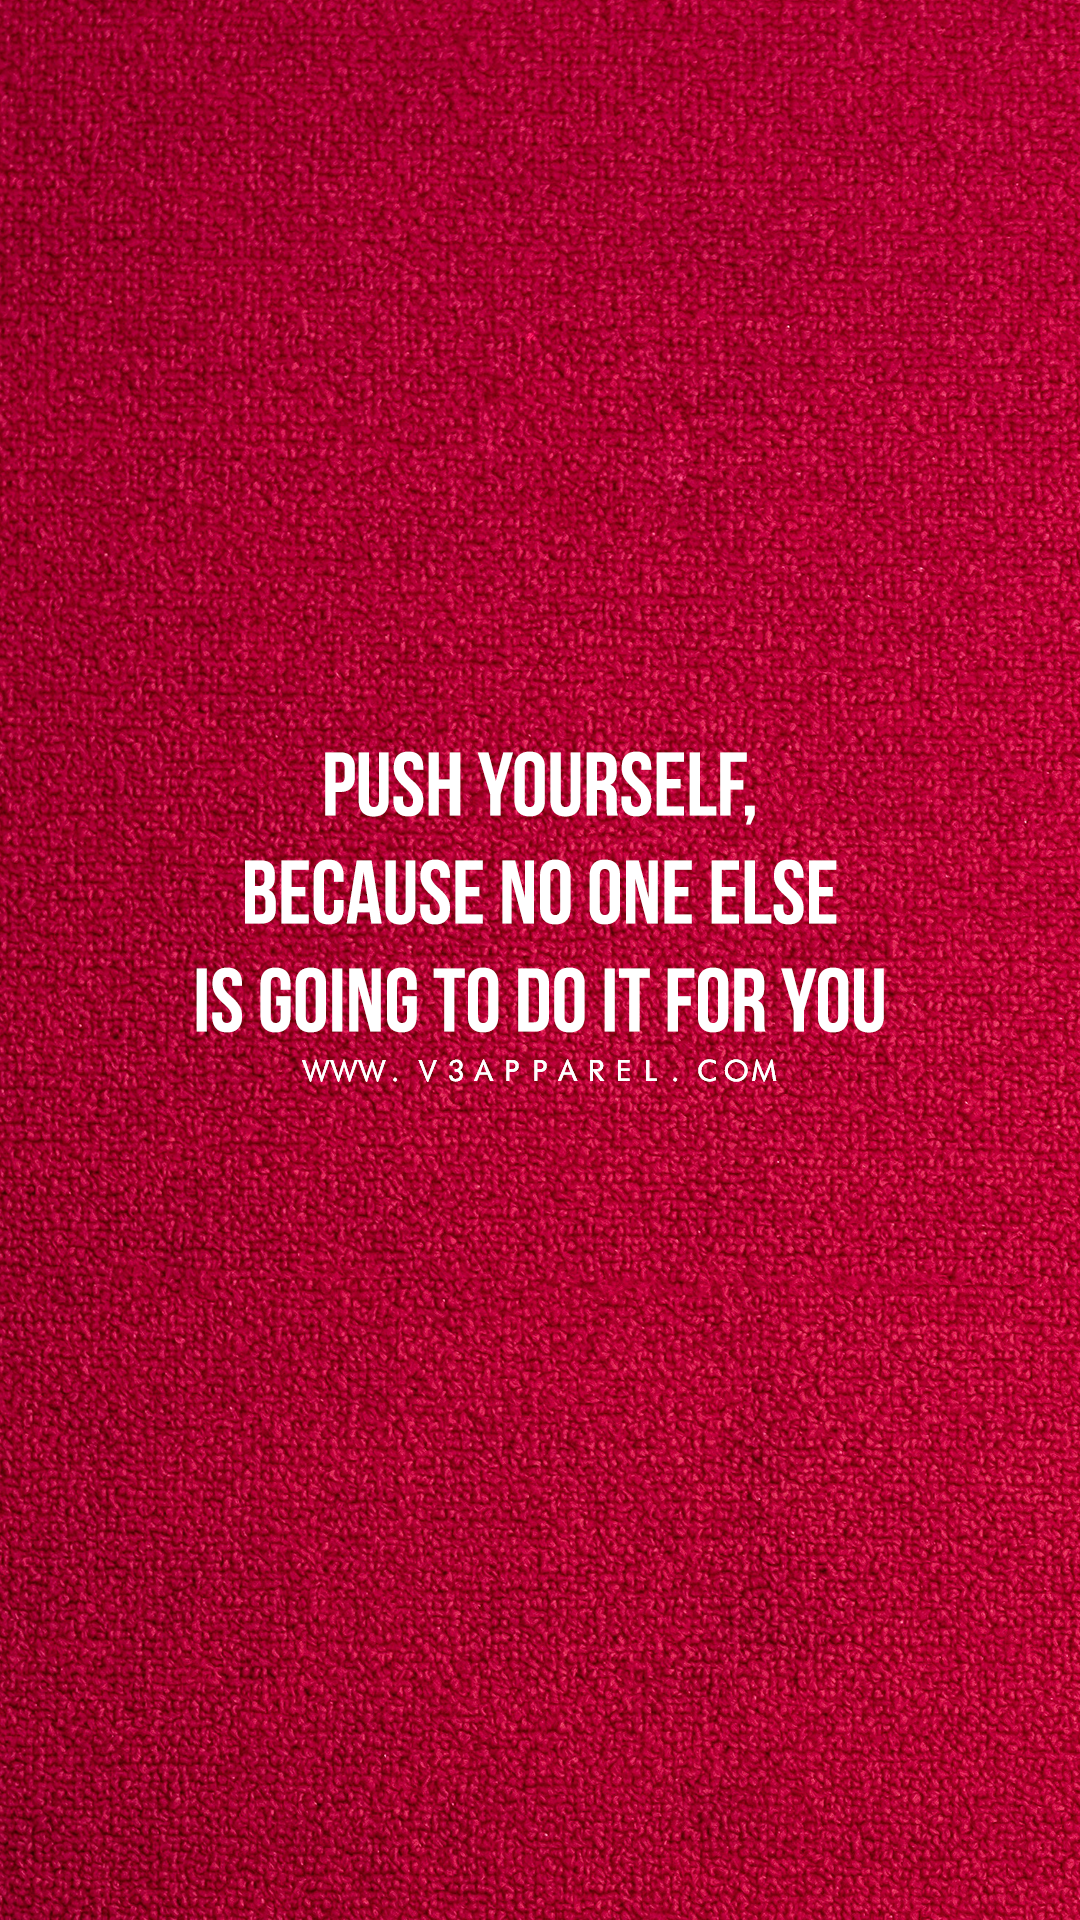 Push Yourself Because No One Else Will - HD Wallpaper 